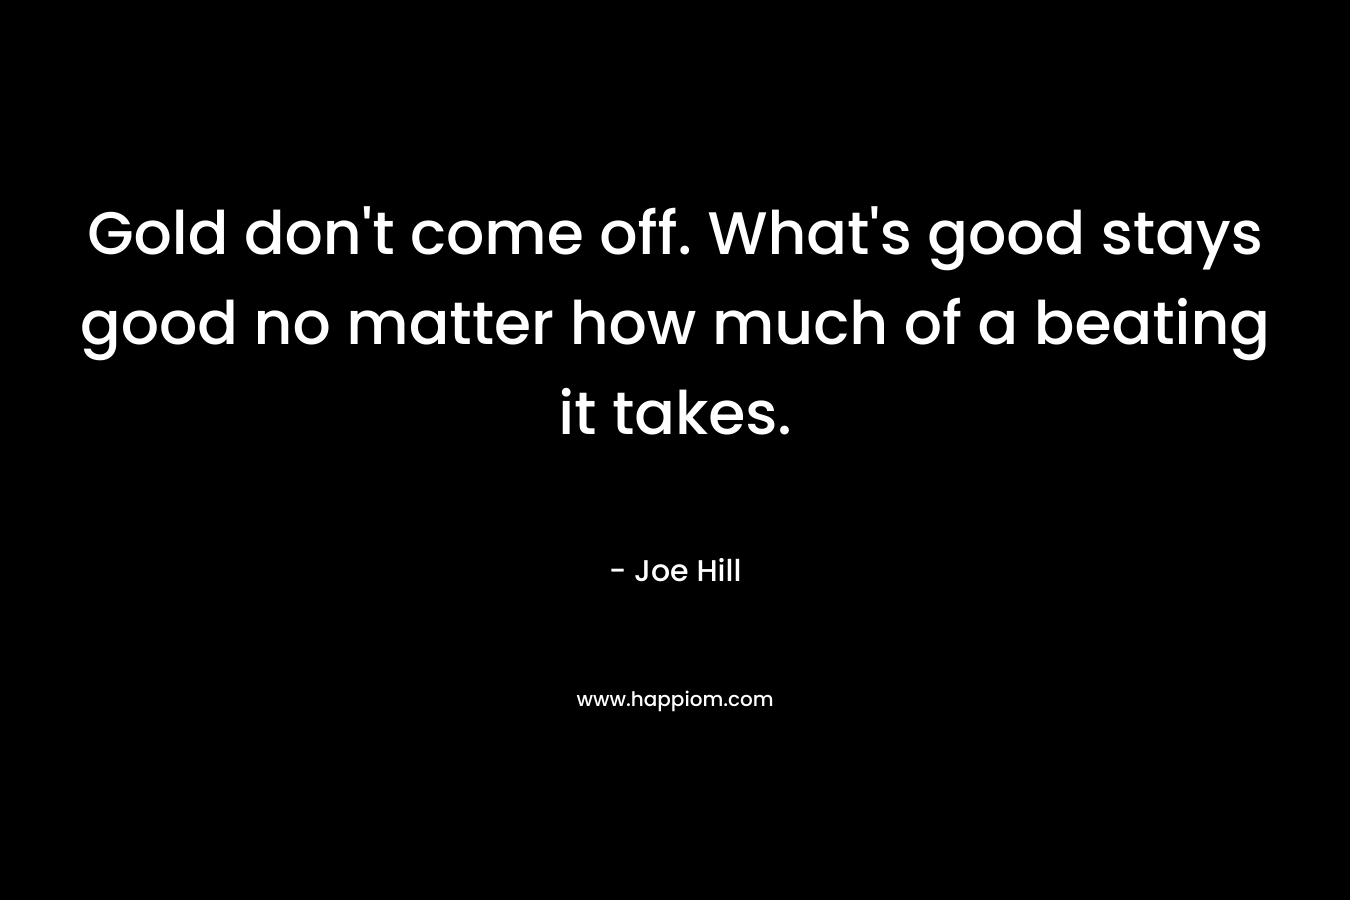 Gold don’t come off. What’s good stays good no matter how much of a beating it takes. – Joe Hill